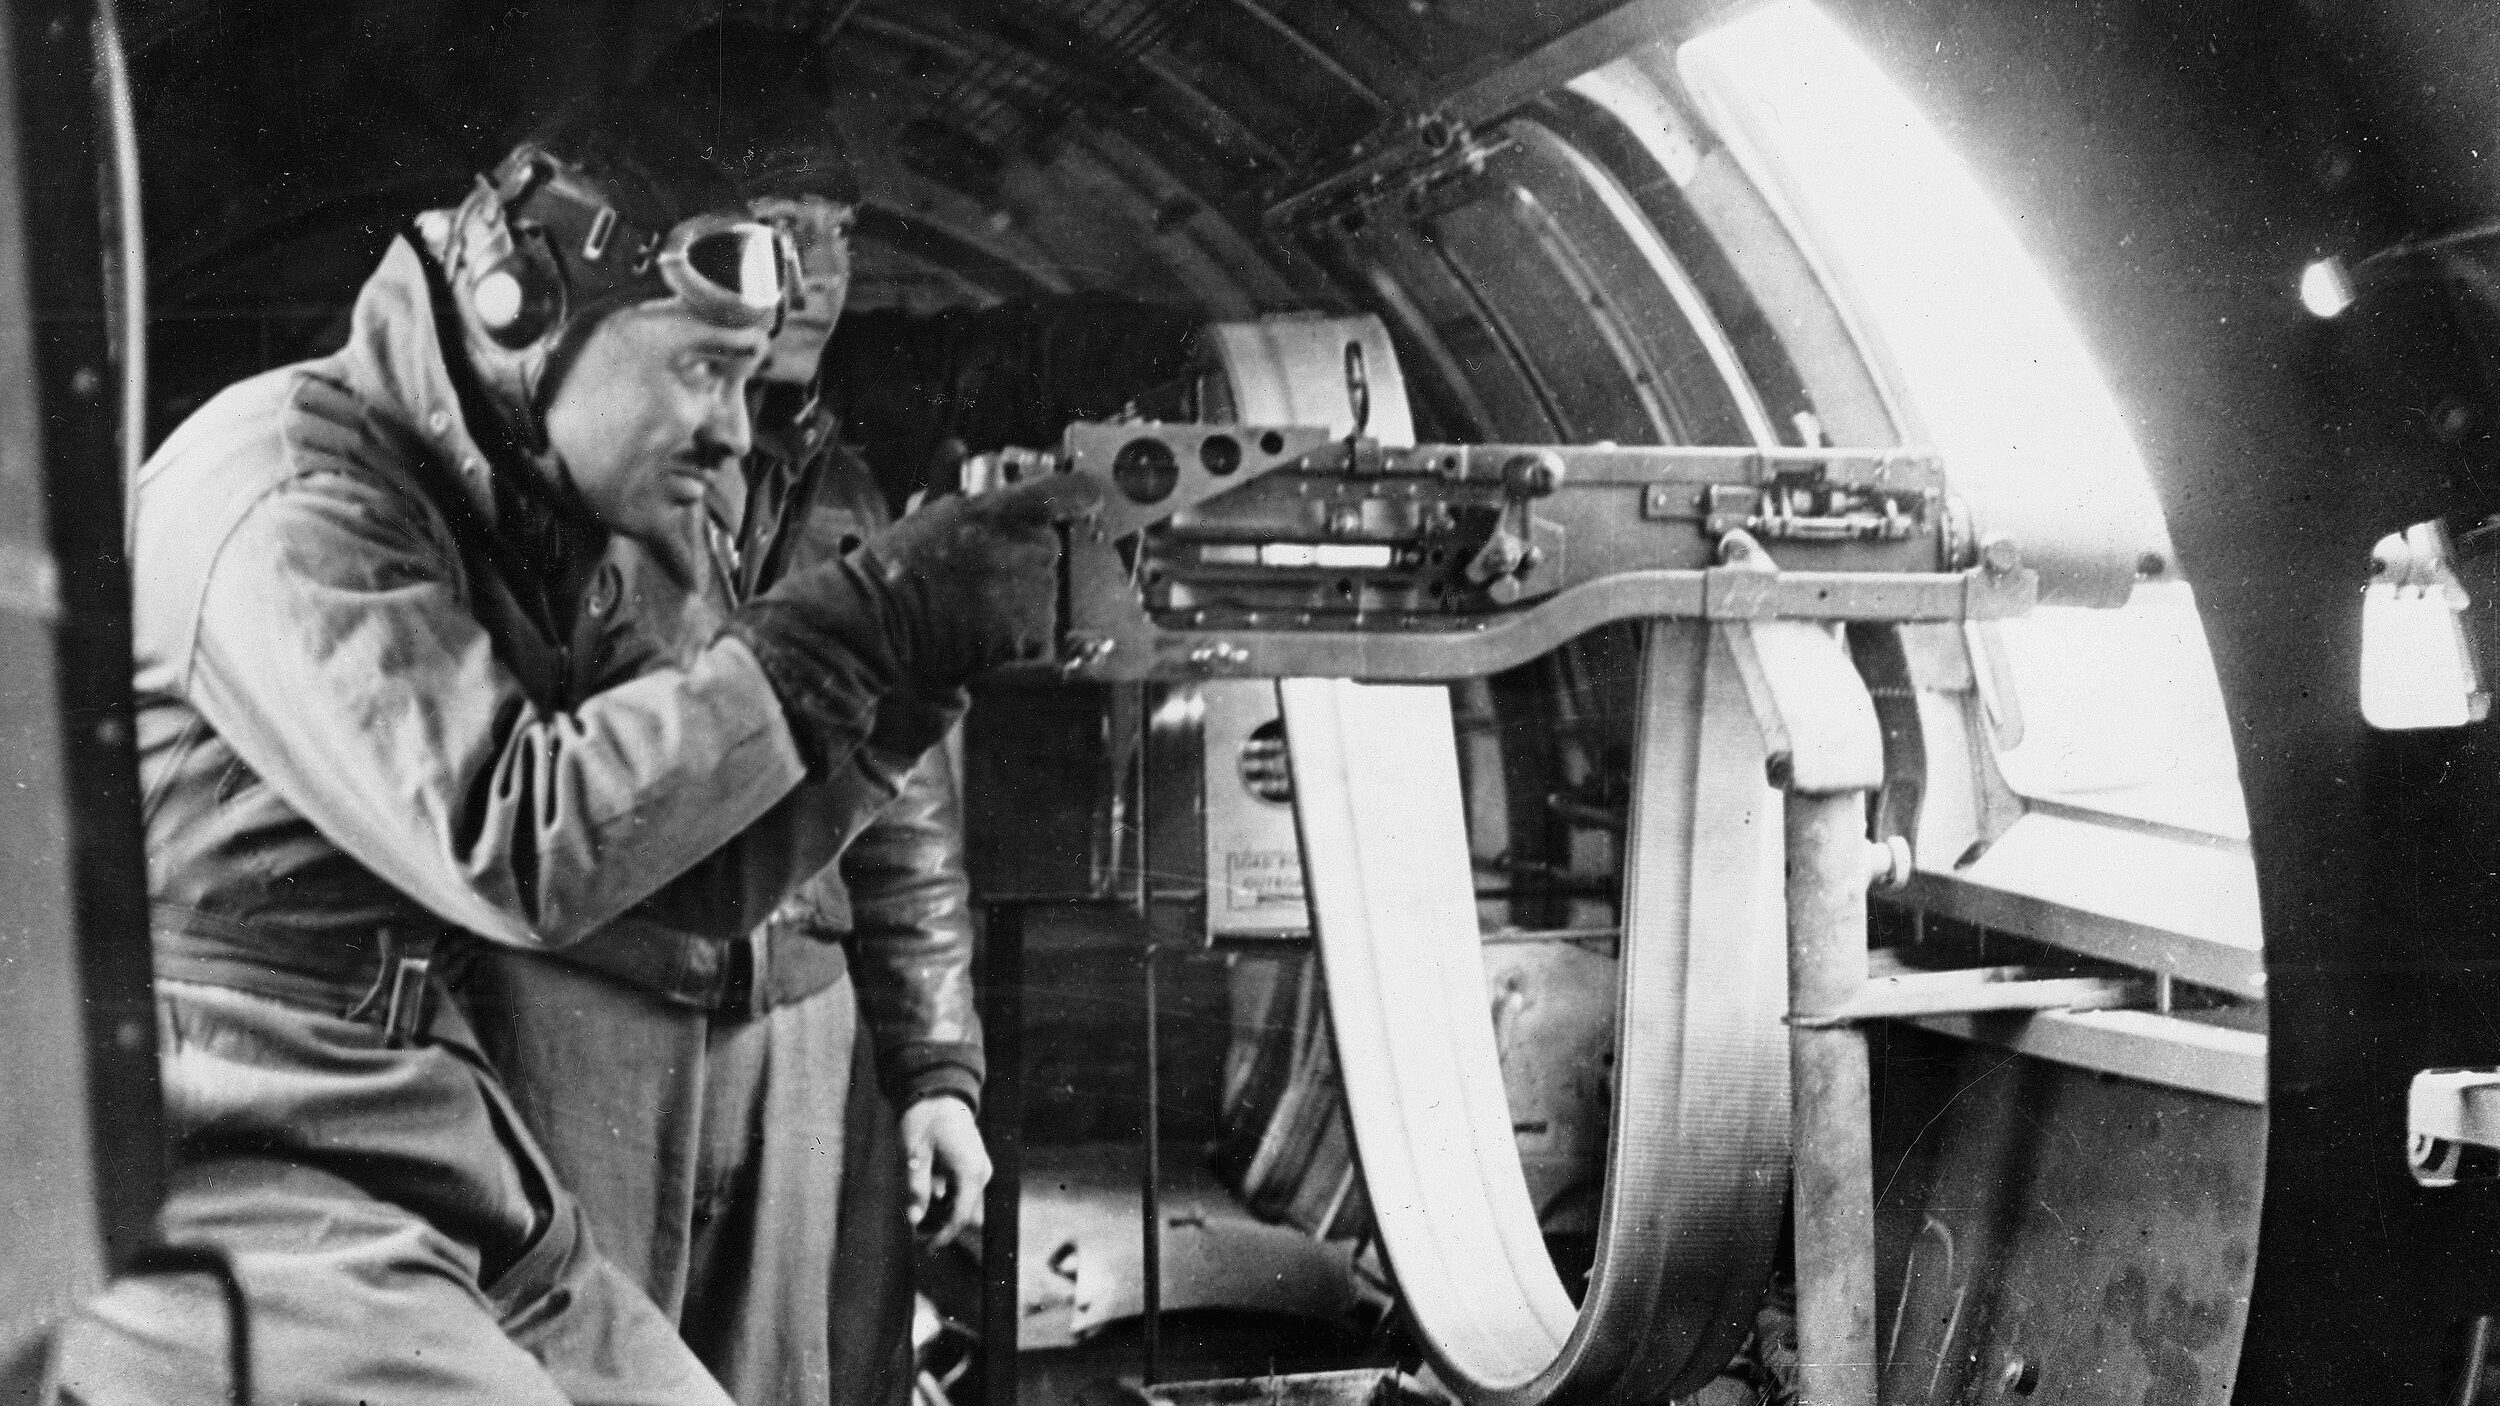 After OCS and gunnery school, Clark Gable was assigned to the 351st Bomb Group in Polebrook, England. Here he demonstrates the techniques for handing a waist gun.